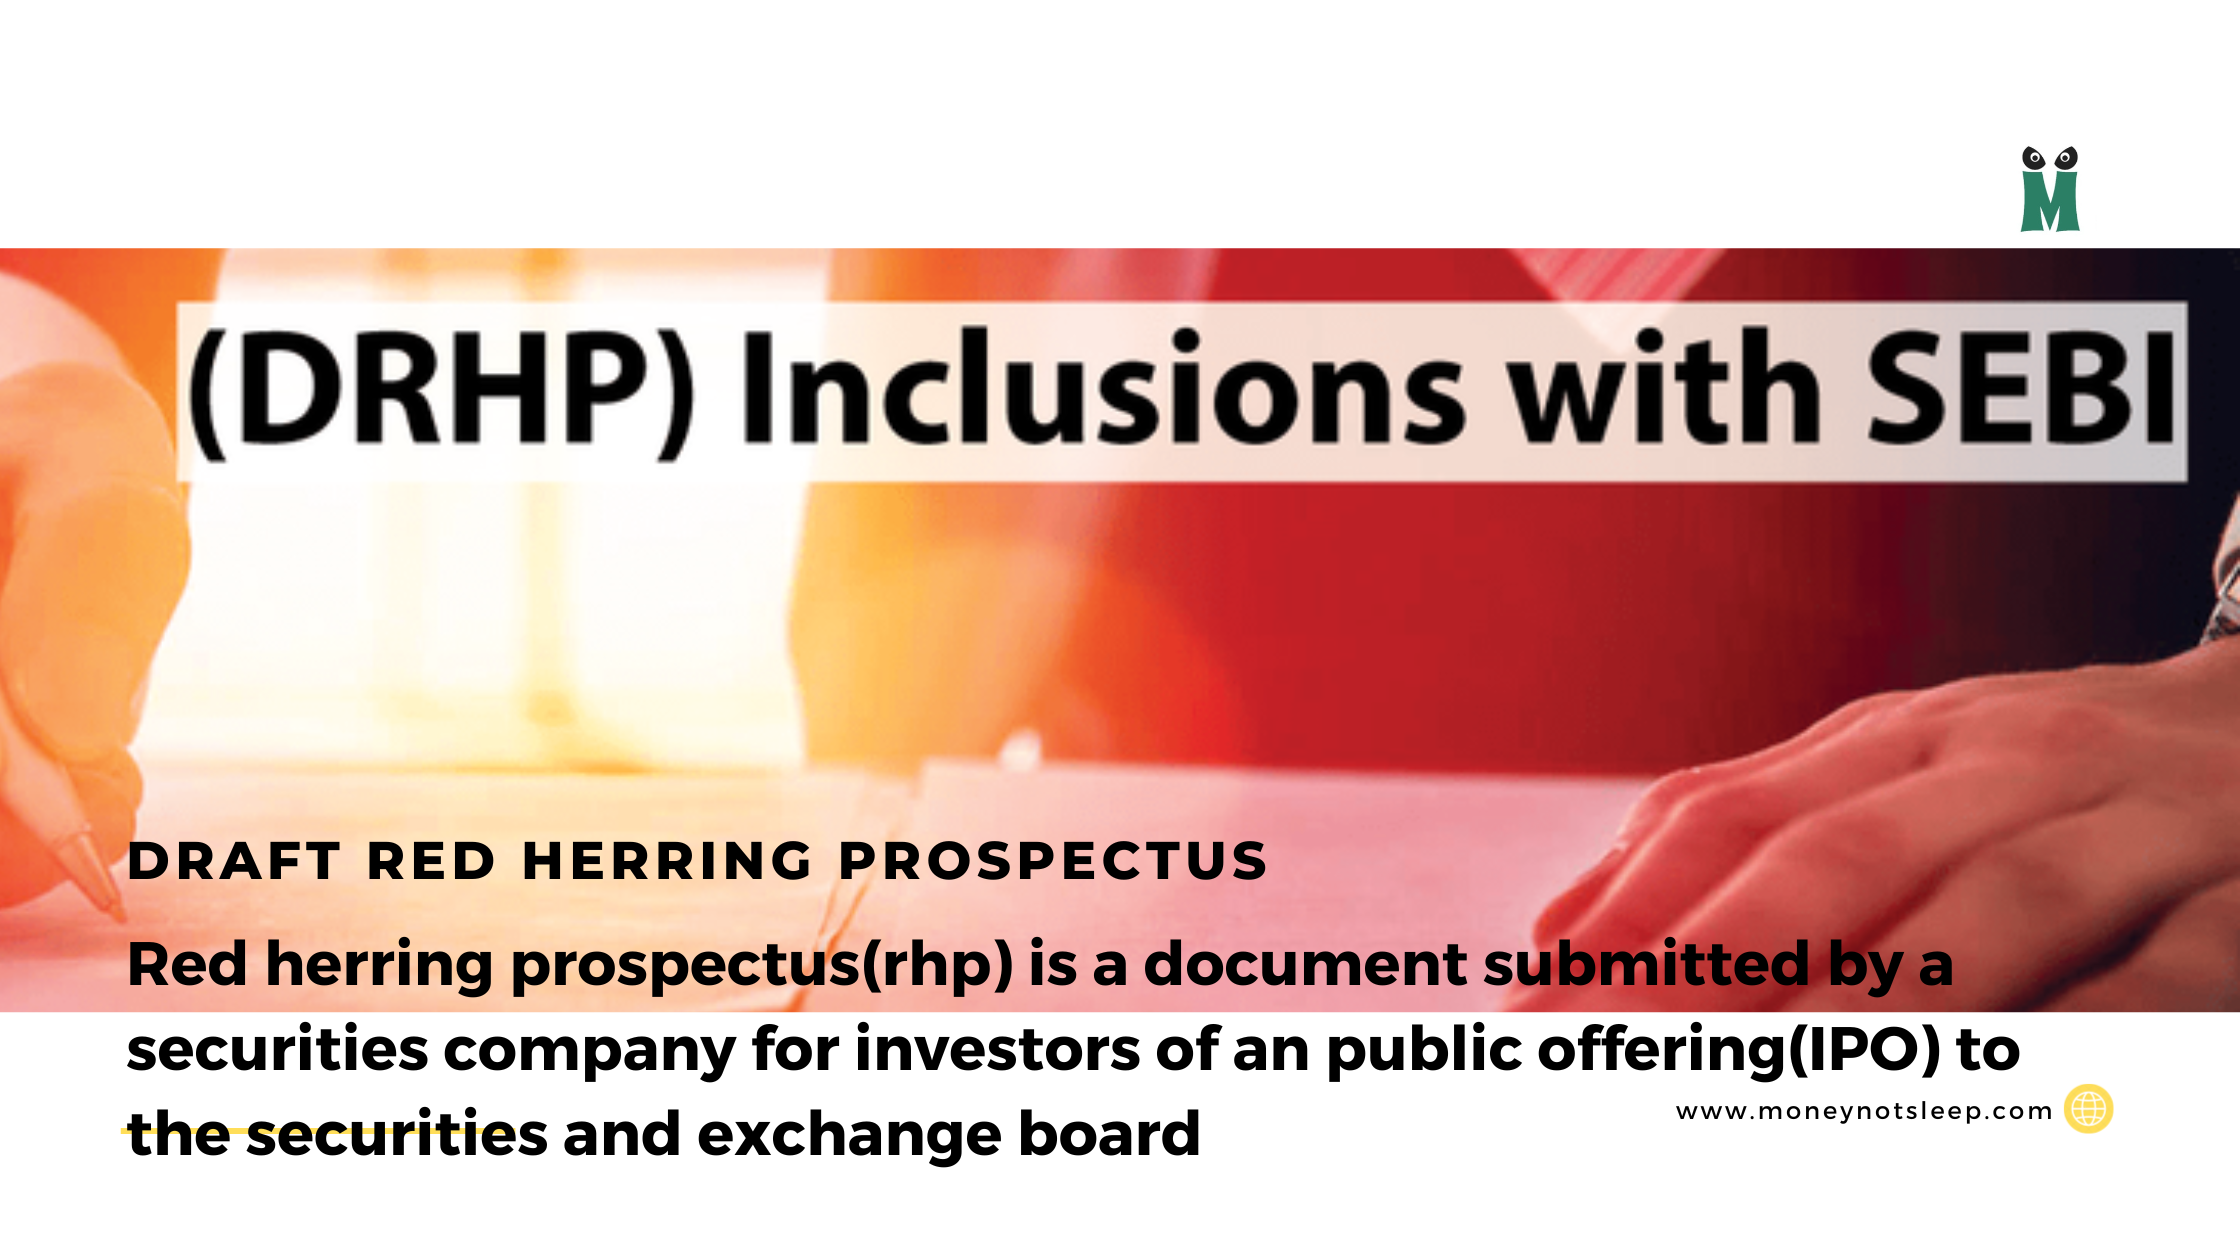 What to look out for in a Draft Red Herring Prospectus (rhp)?